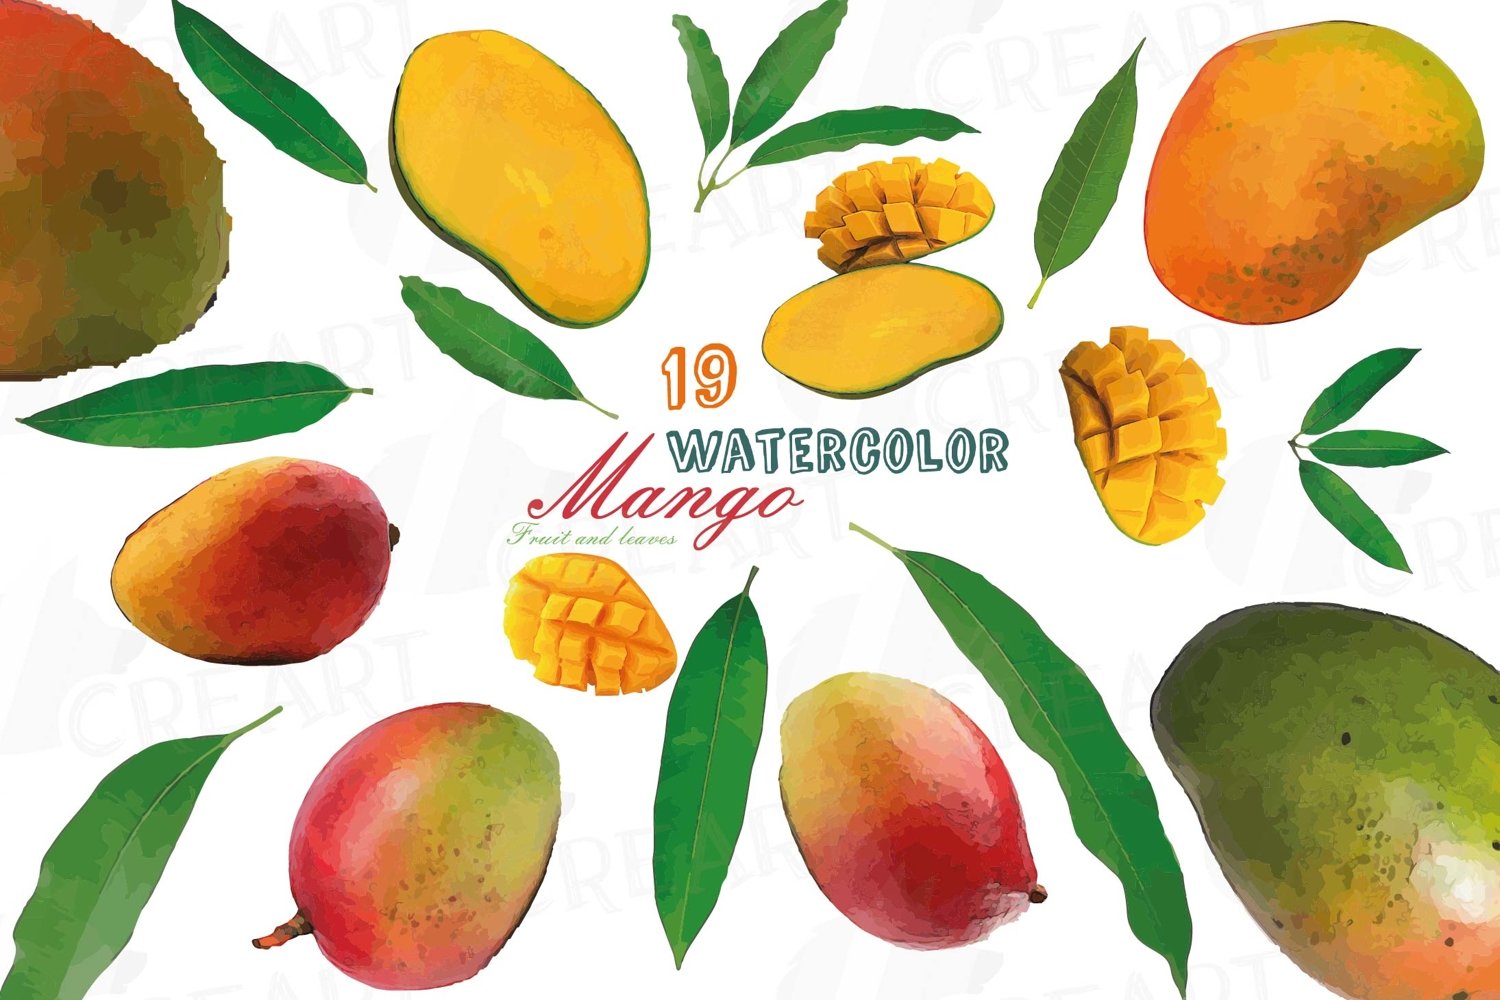 Cover image of Watercolor Mango clip art pack.